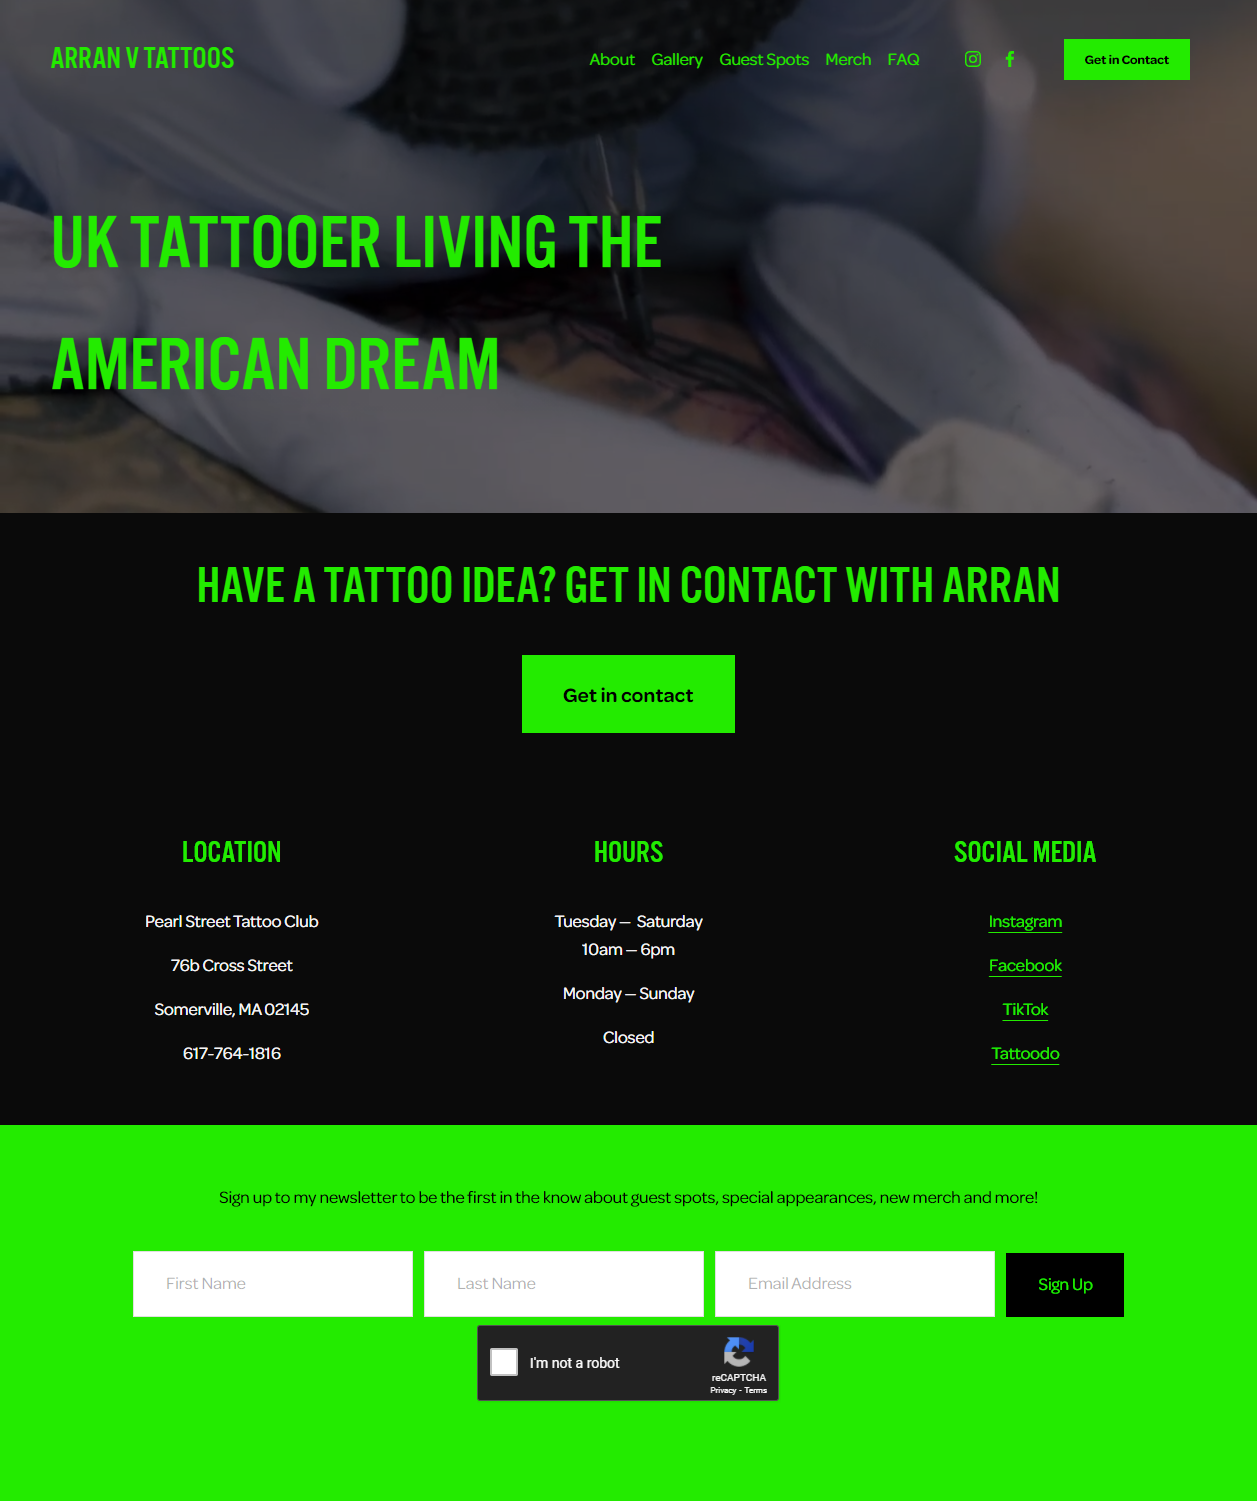 Image of of Arran V Tattoos Home page